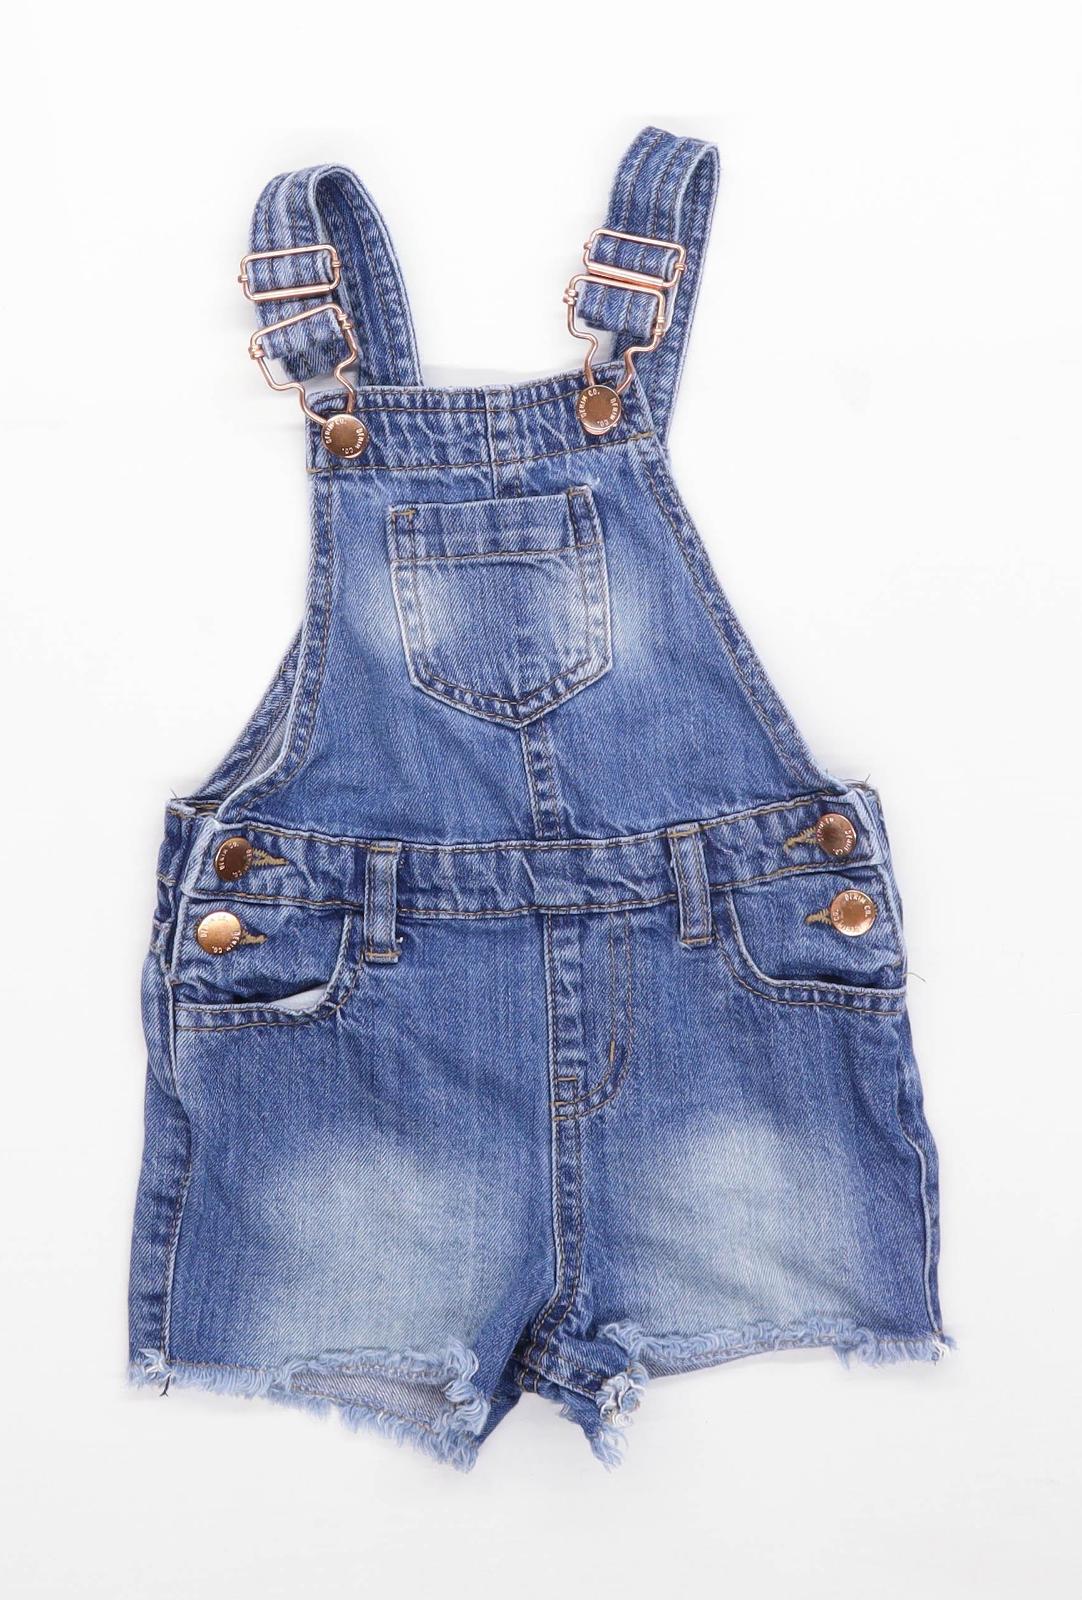 Primark Girls Blue Button Close Dungarees Shorts Age 2-3 Years